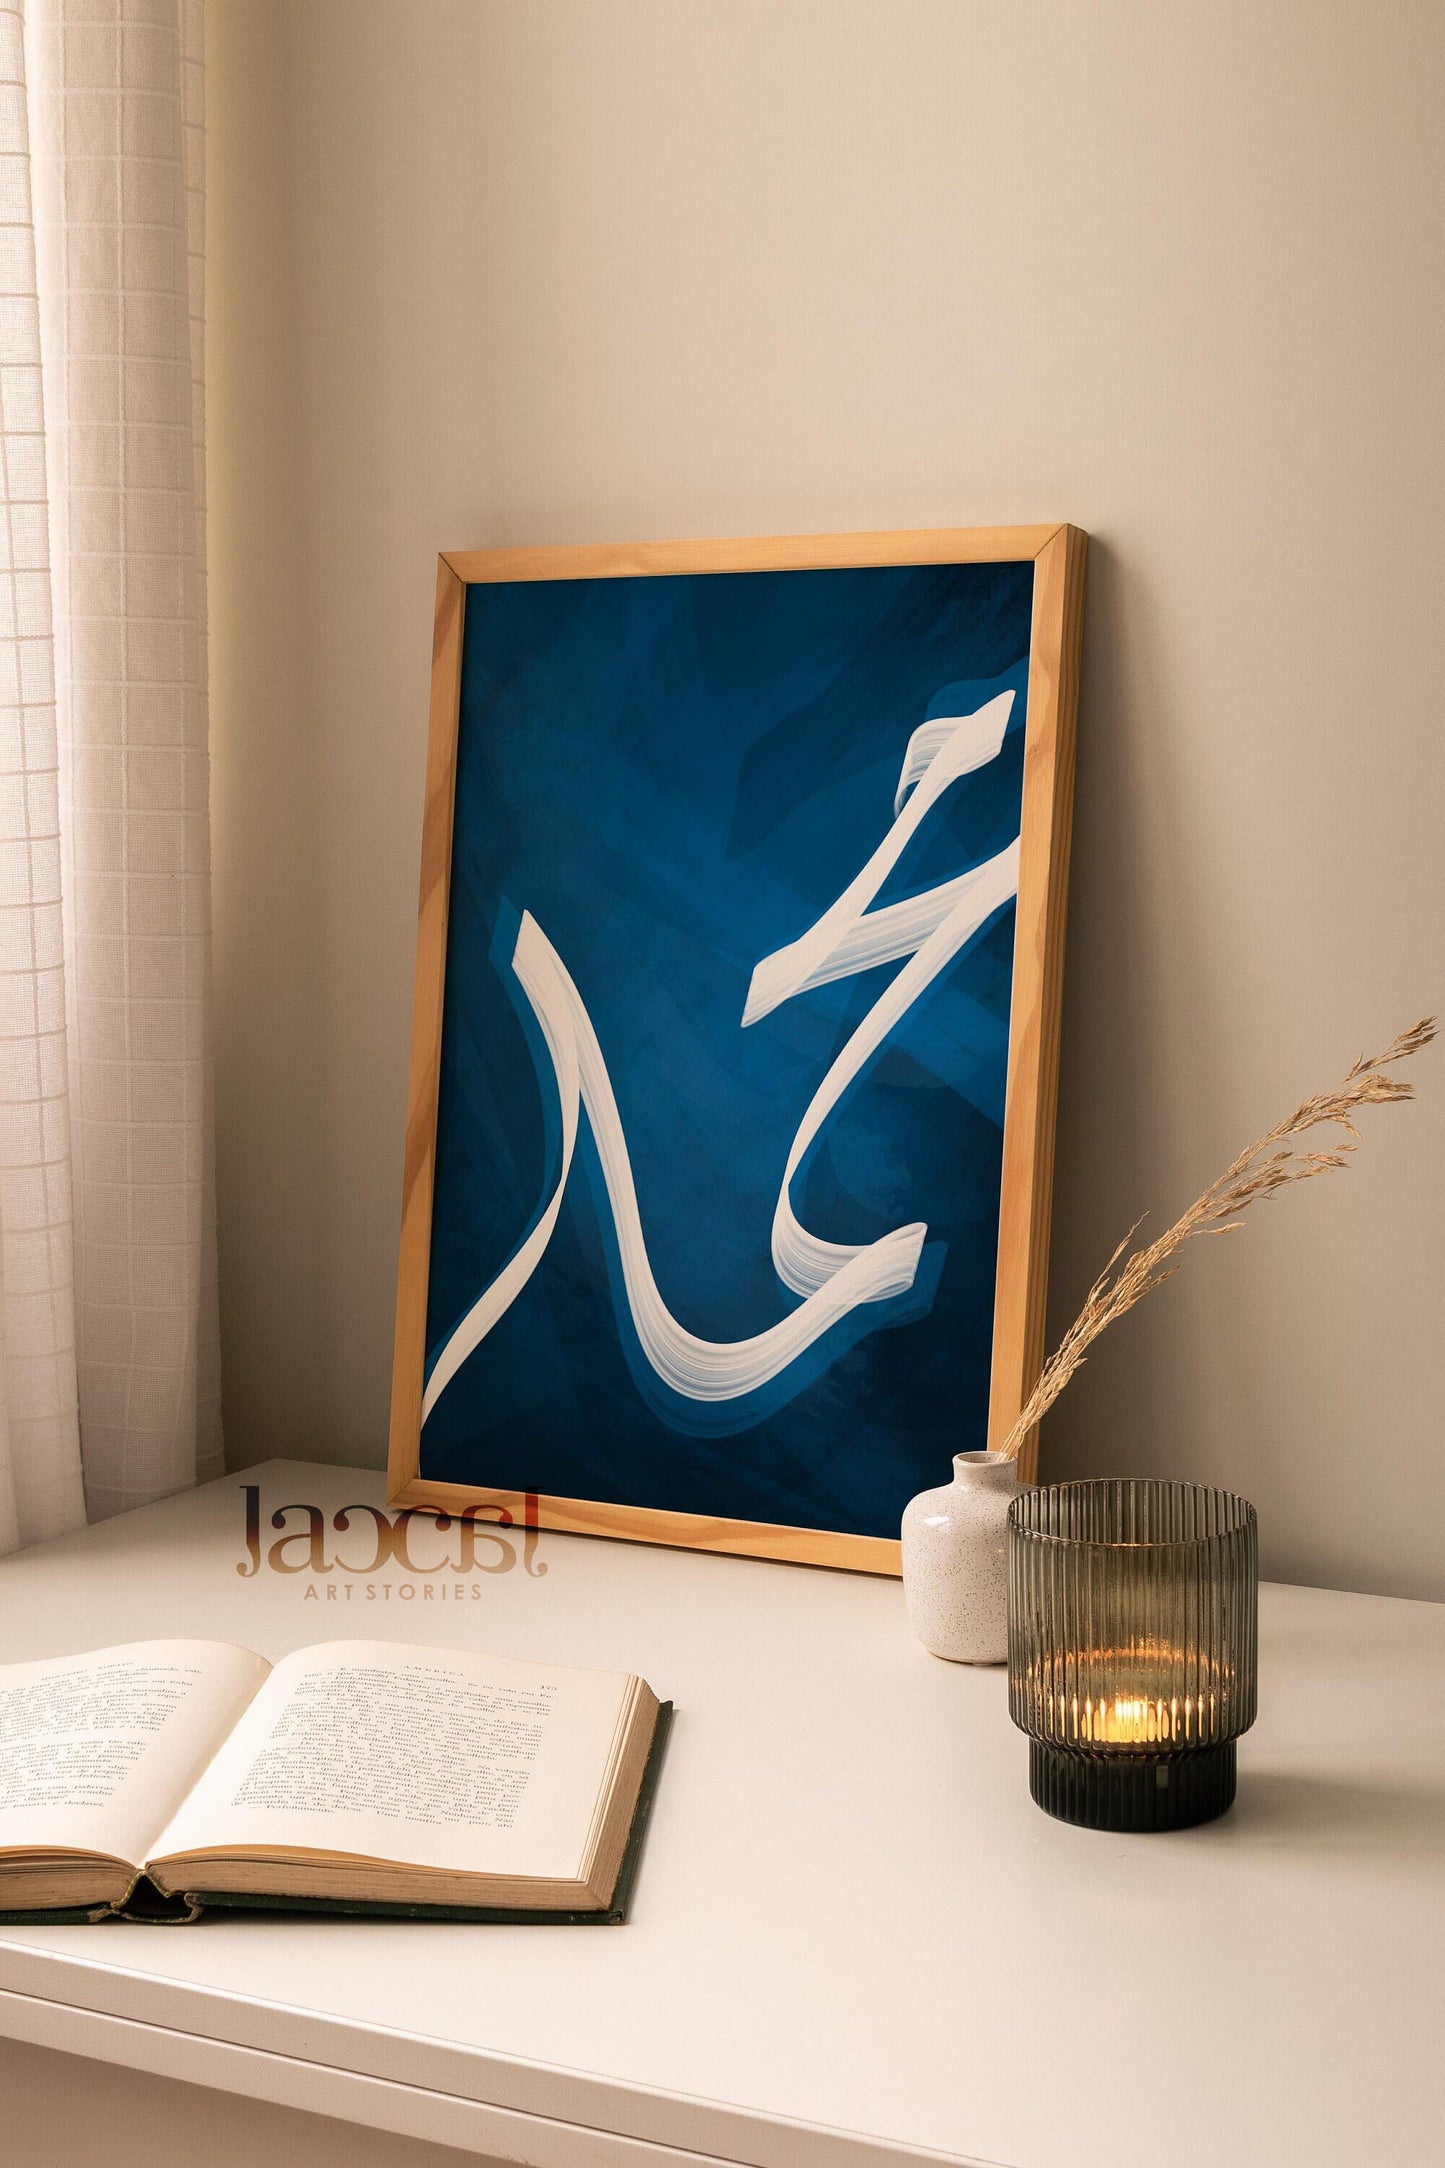 Allah and Muhammad Arabic Calligraphy Abstract Blue